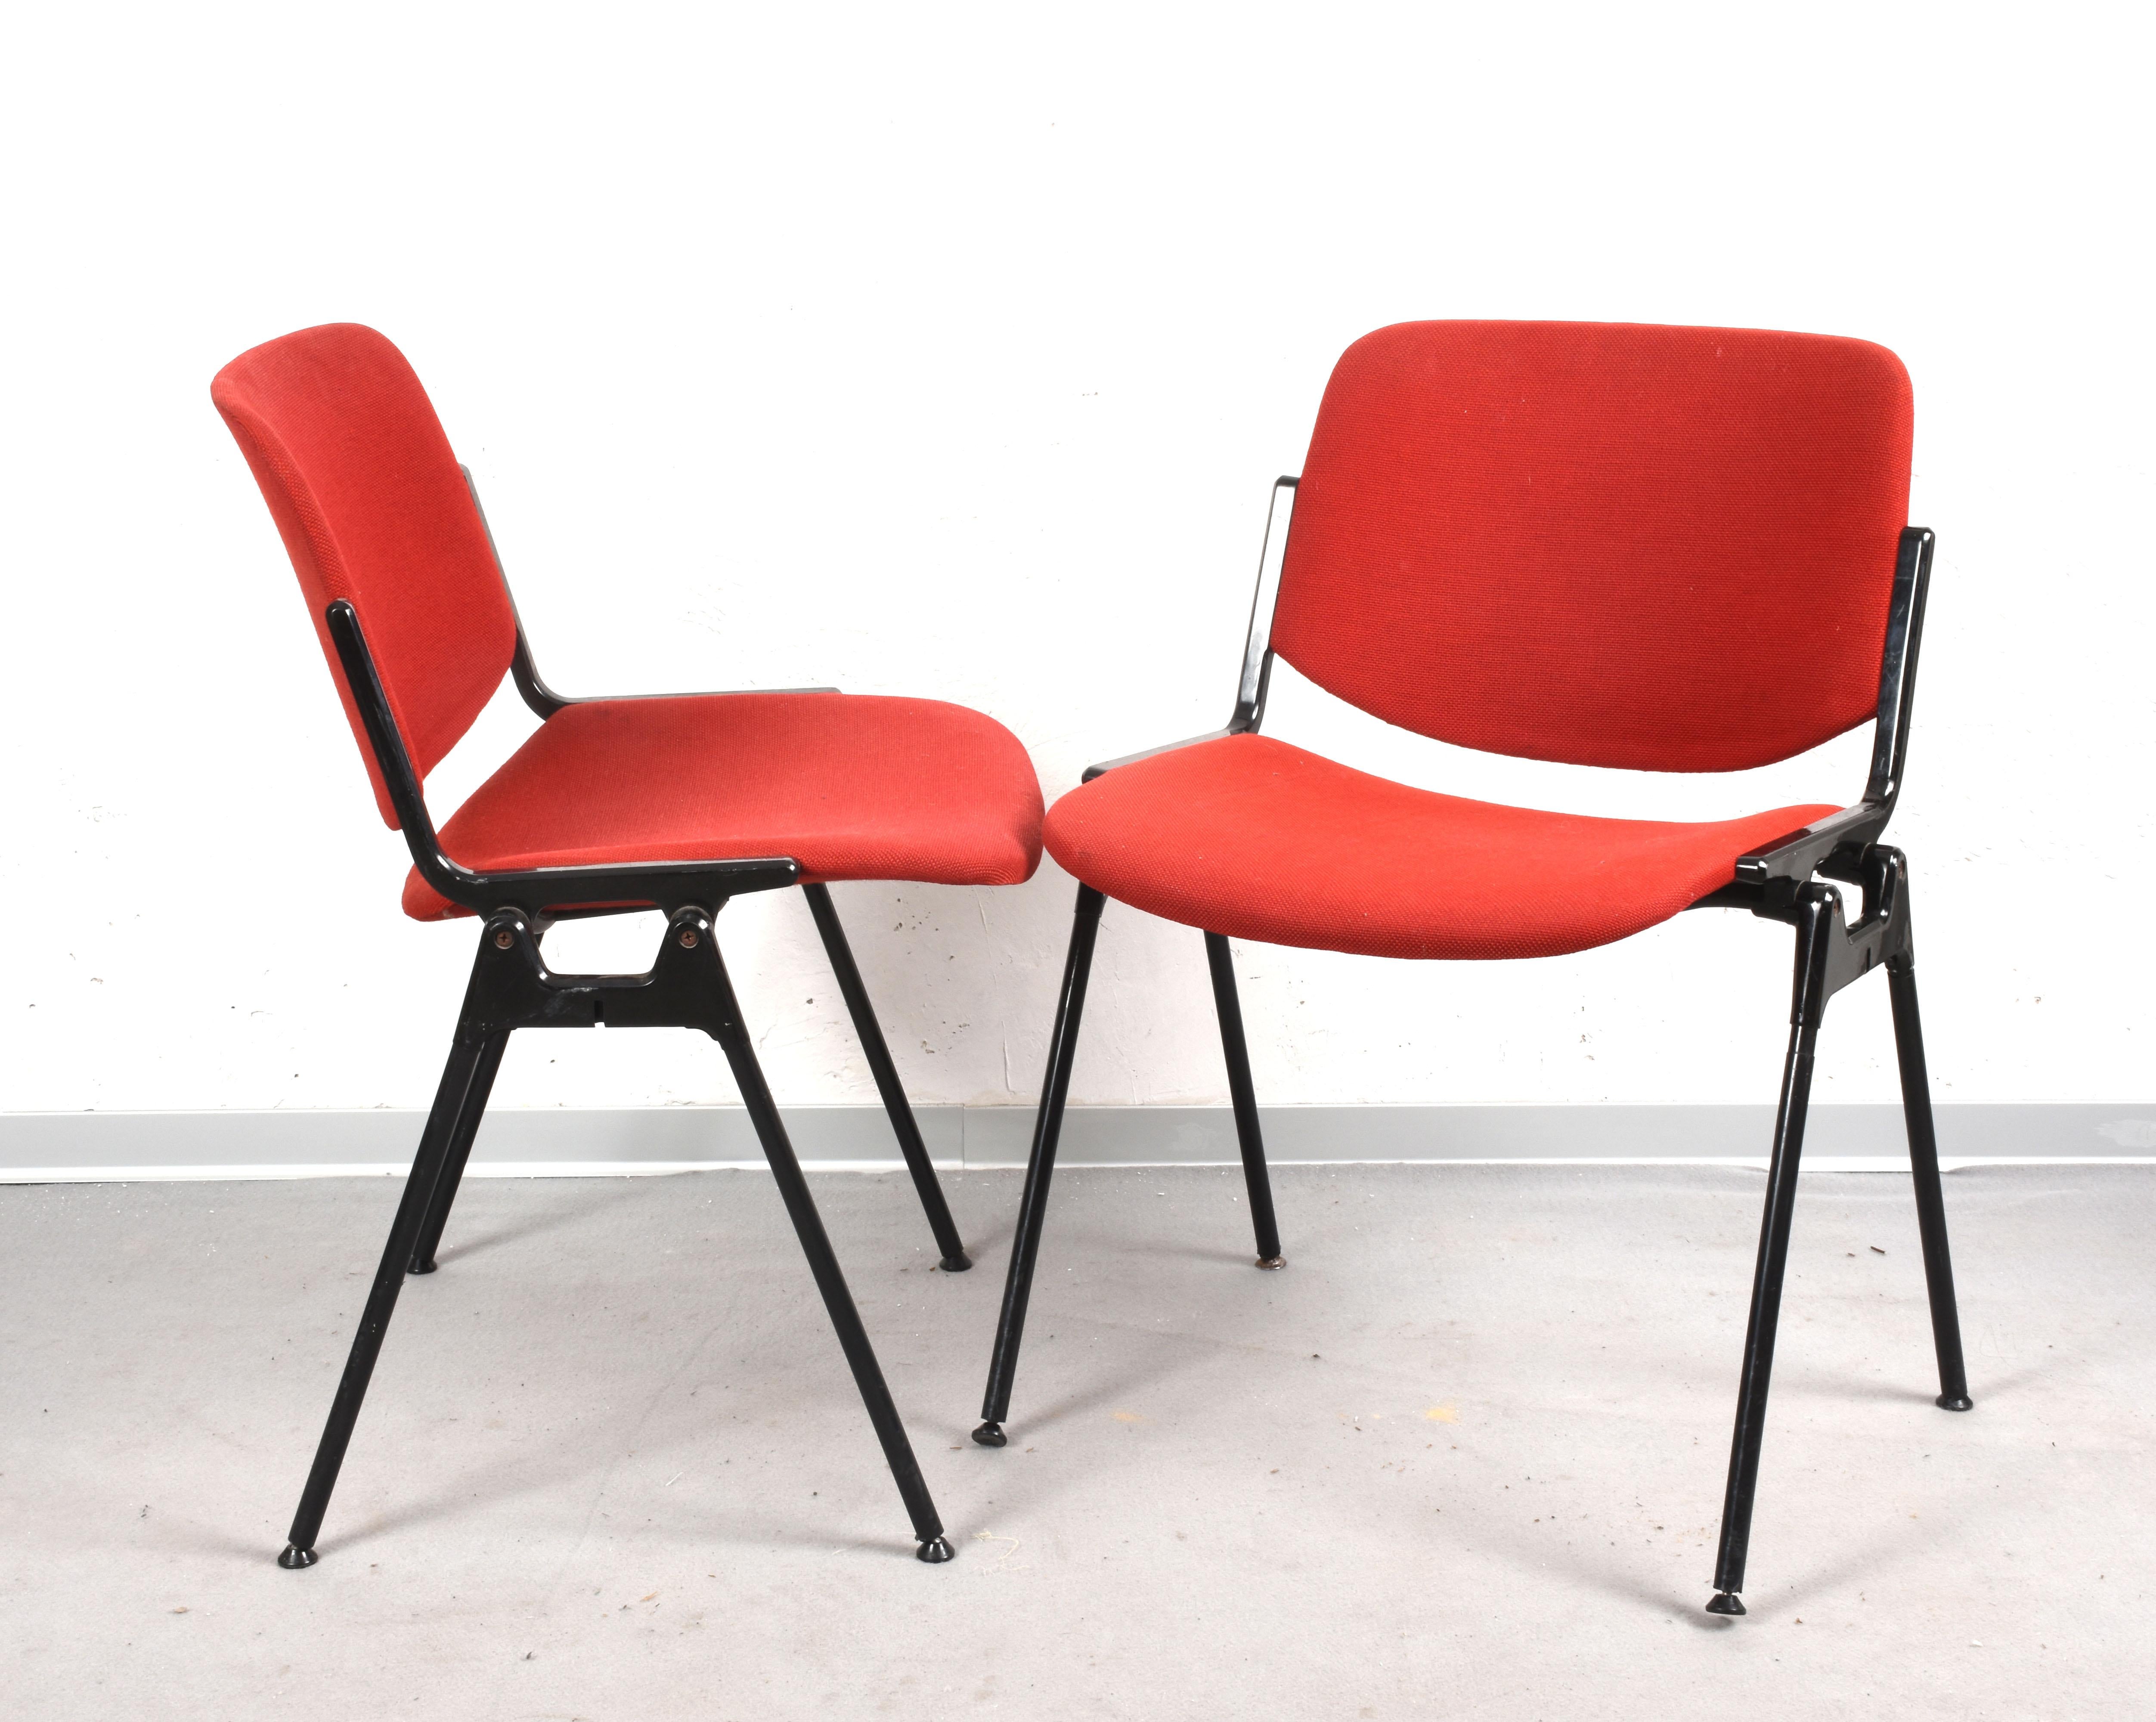 Enameled Pair of Red Chair DSC 106 Giancarlo Piretti for Castelli Aluminum, Italy, 1960s For Sale